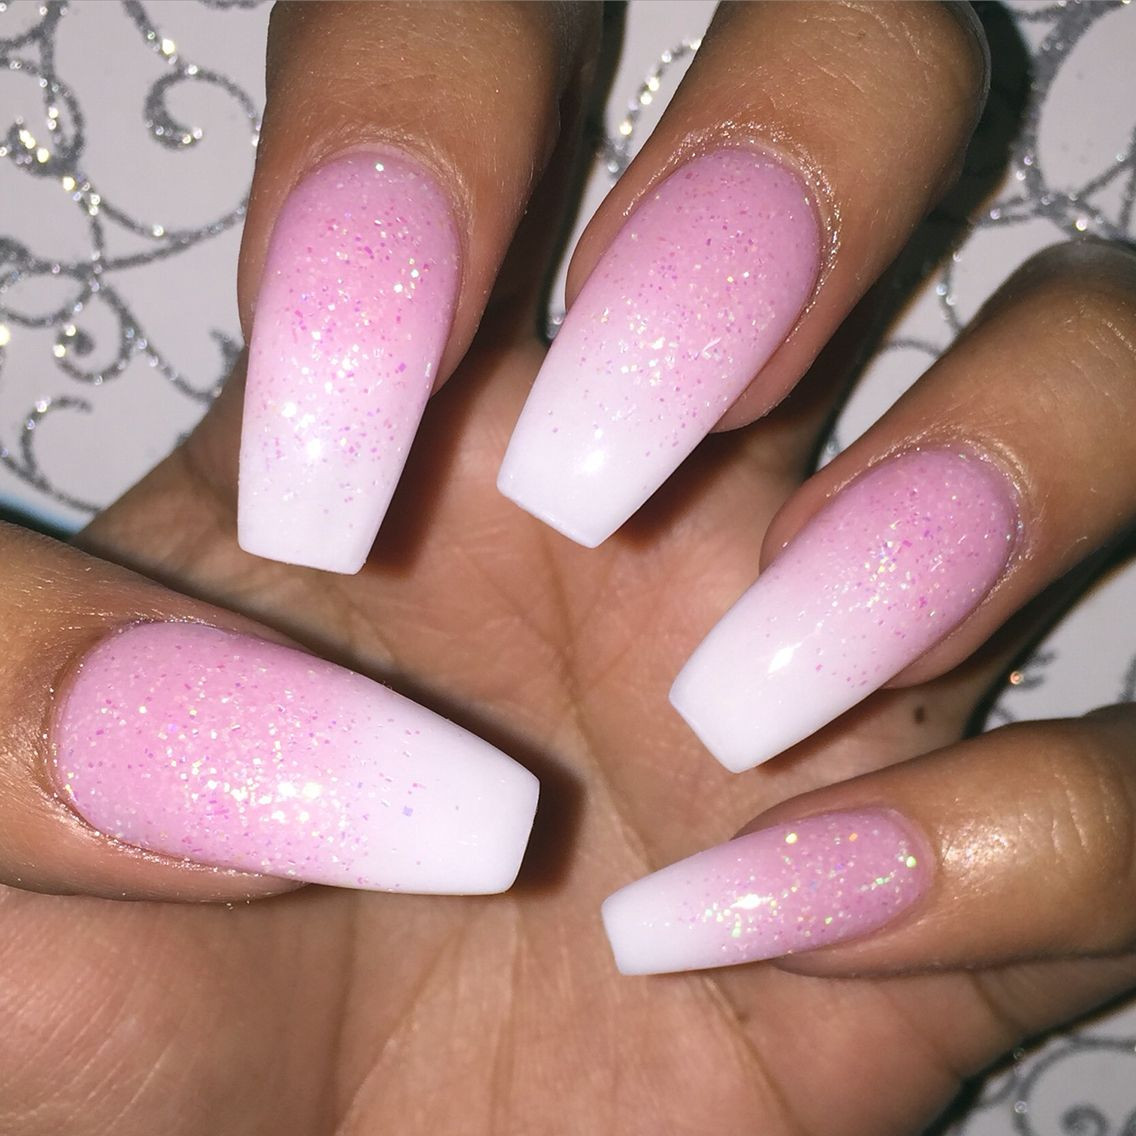 Pink Coffin Nails With Glitter
 Nails coffin nails baby boomers pink and white not polish